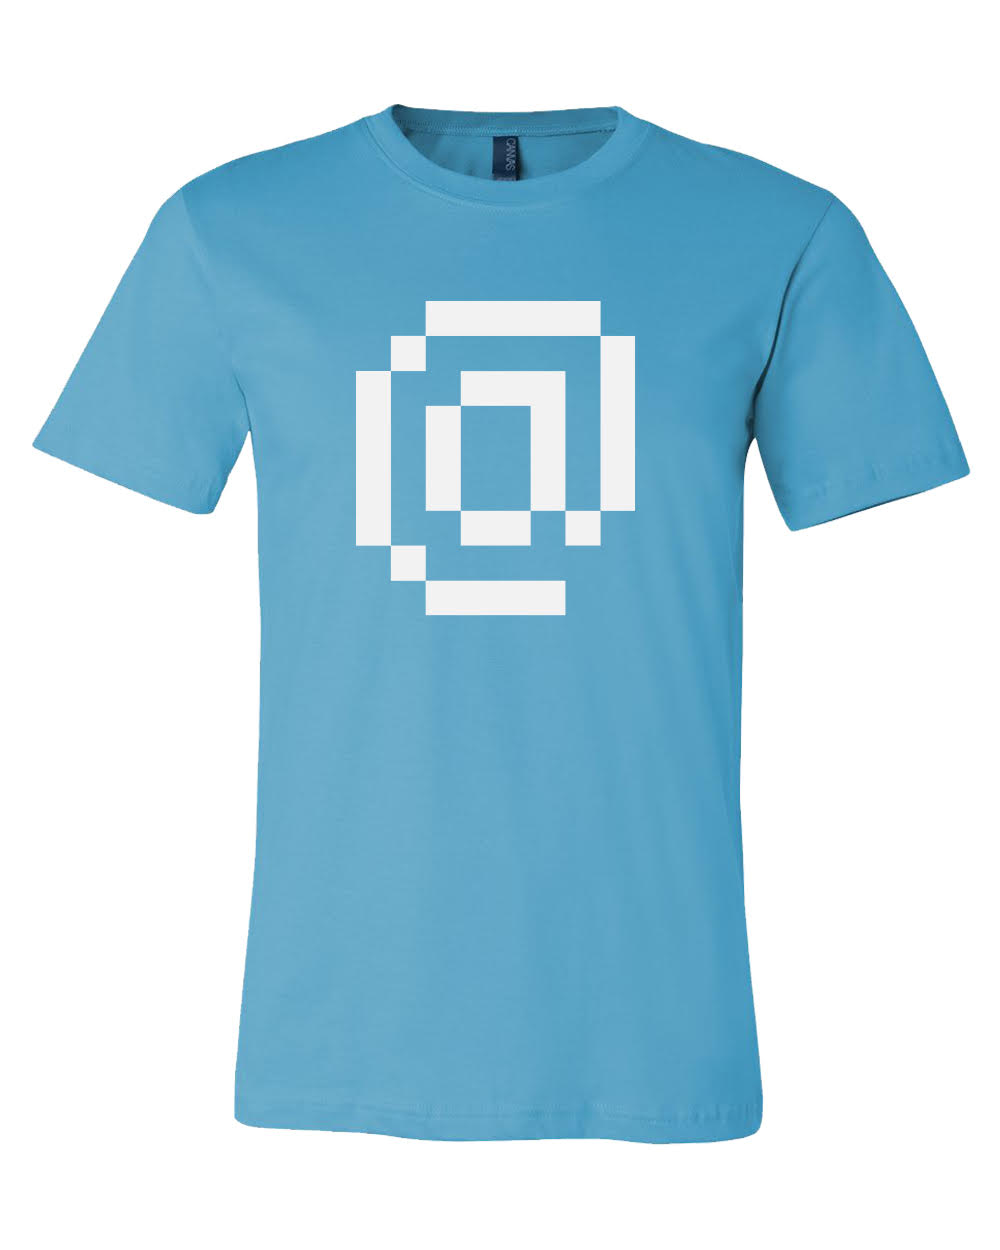 A mockup of a unisex short-sleeve shirt with a white @ symbol.